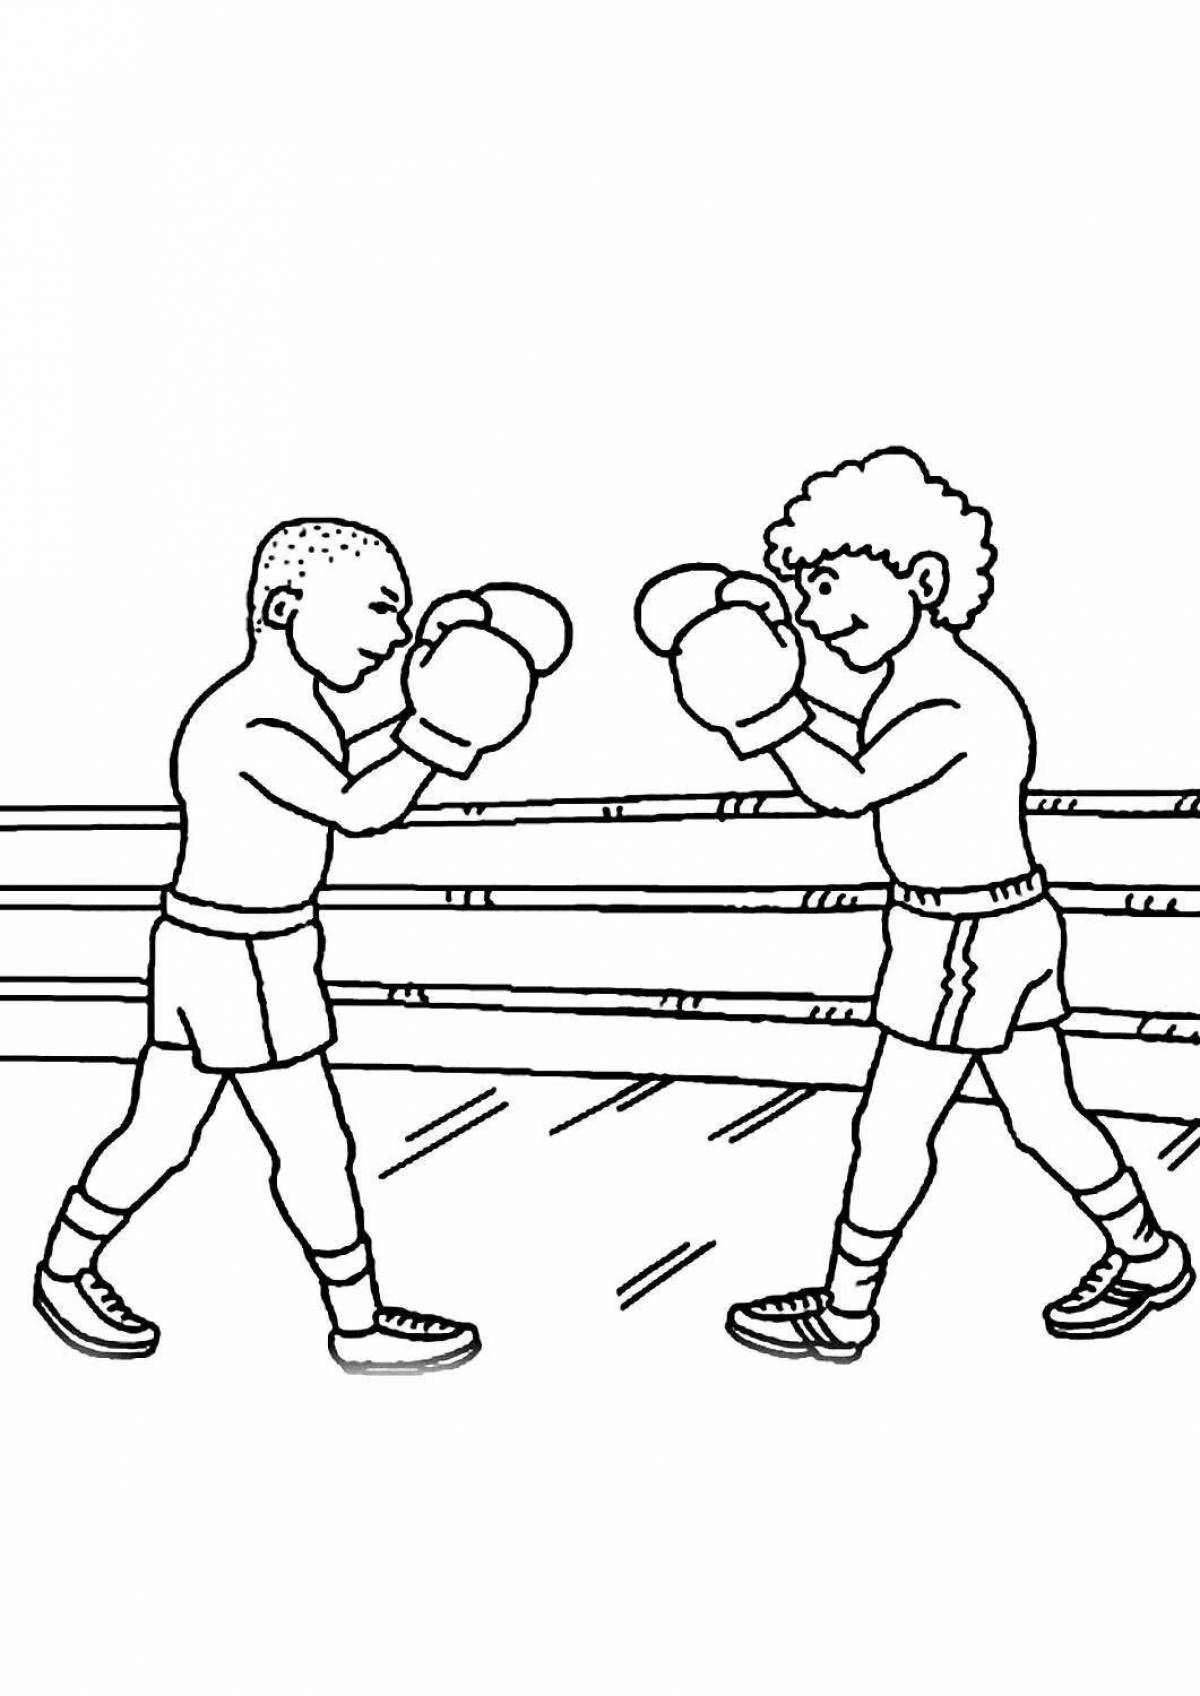 Animated kickboxing coloring page